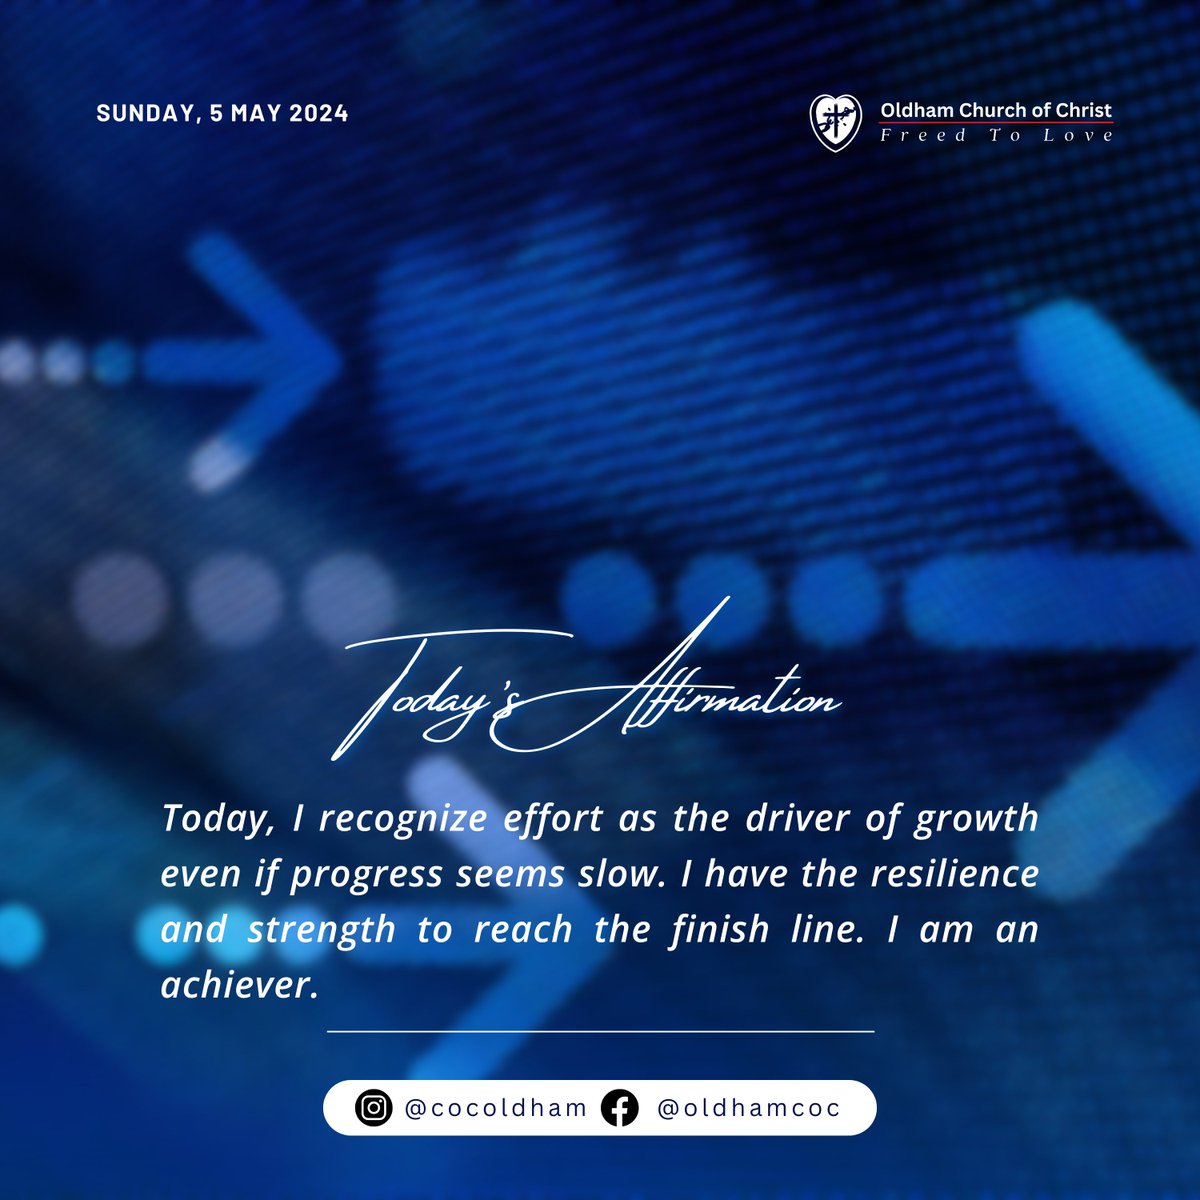 Today, I recognize effort as the driver of growth even if progress seems slow. I have the resilience and strength to reach the finish line. I am an achiever.